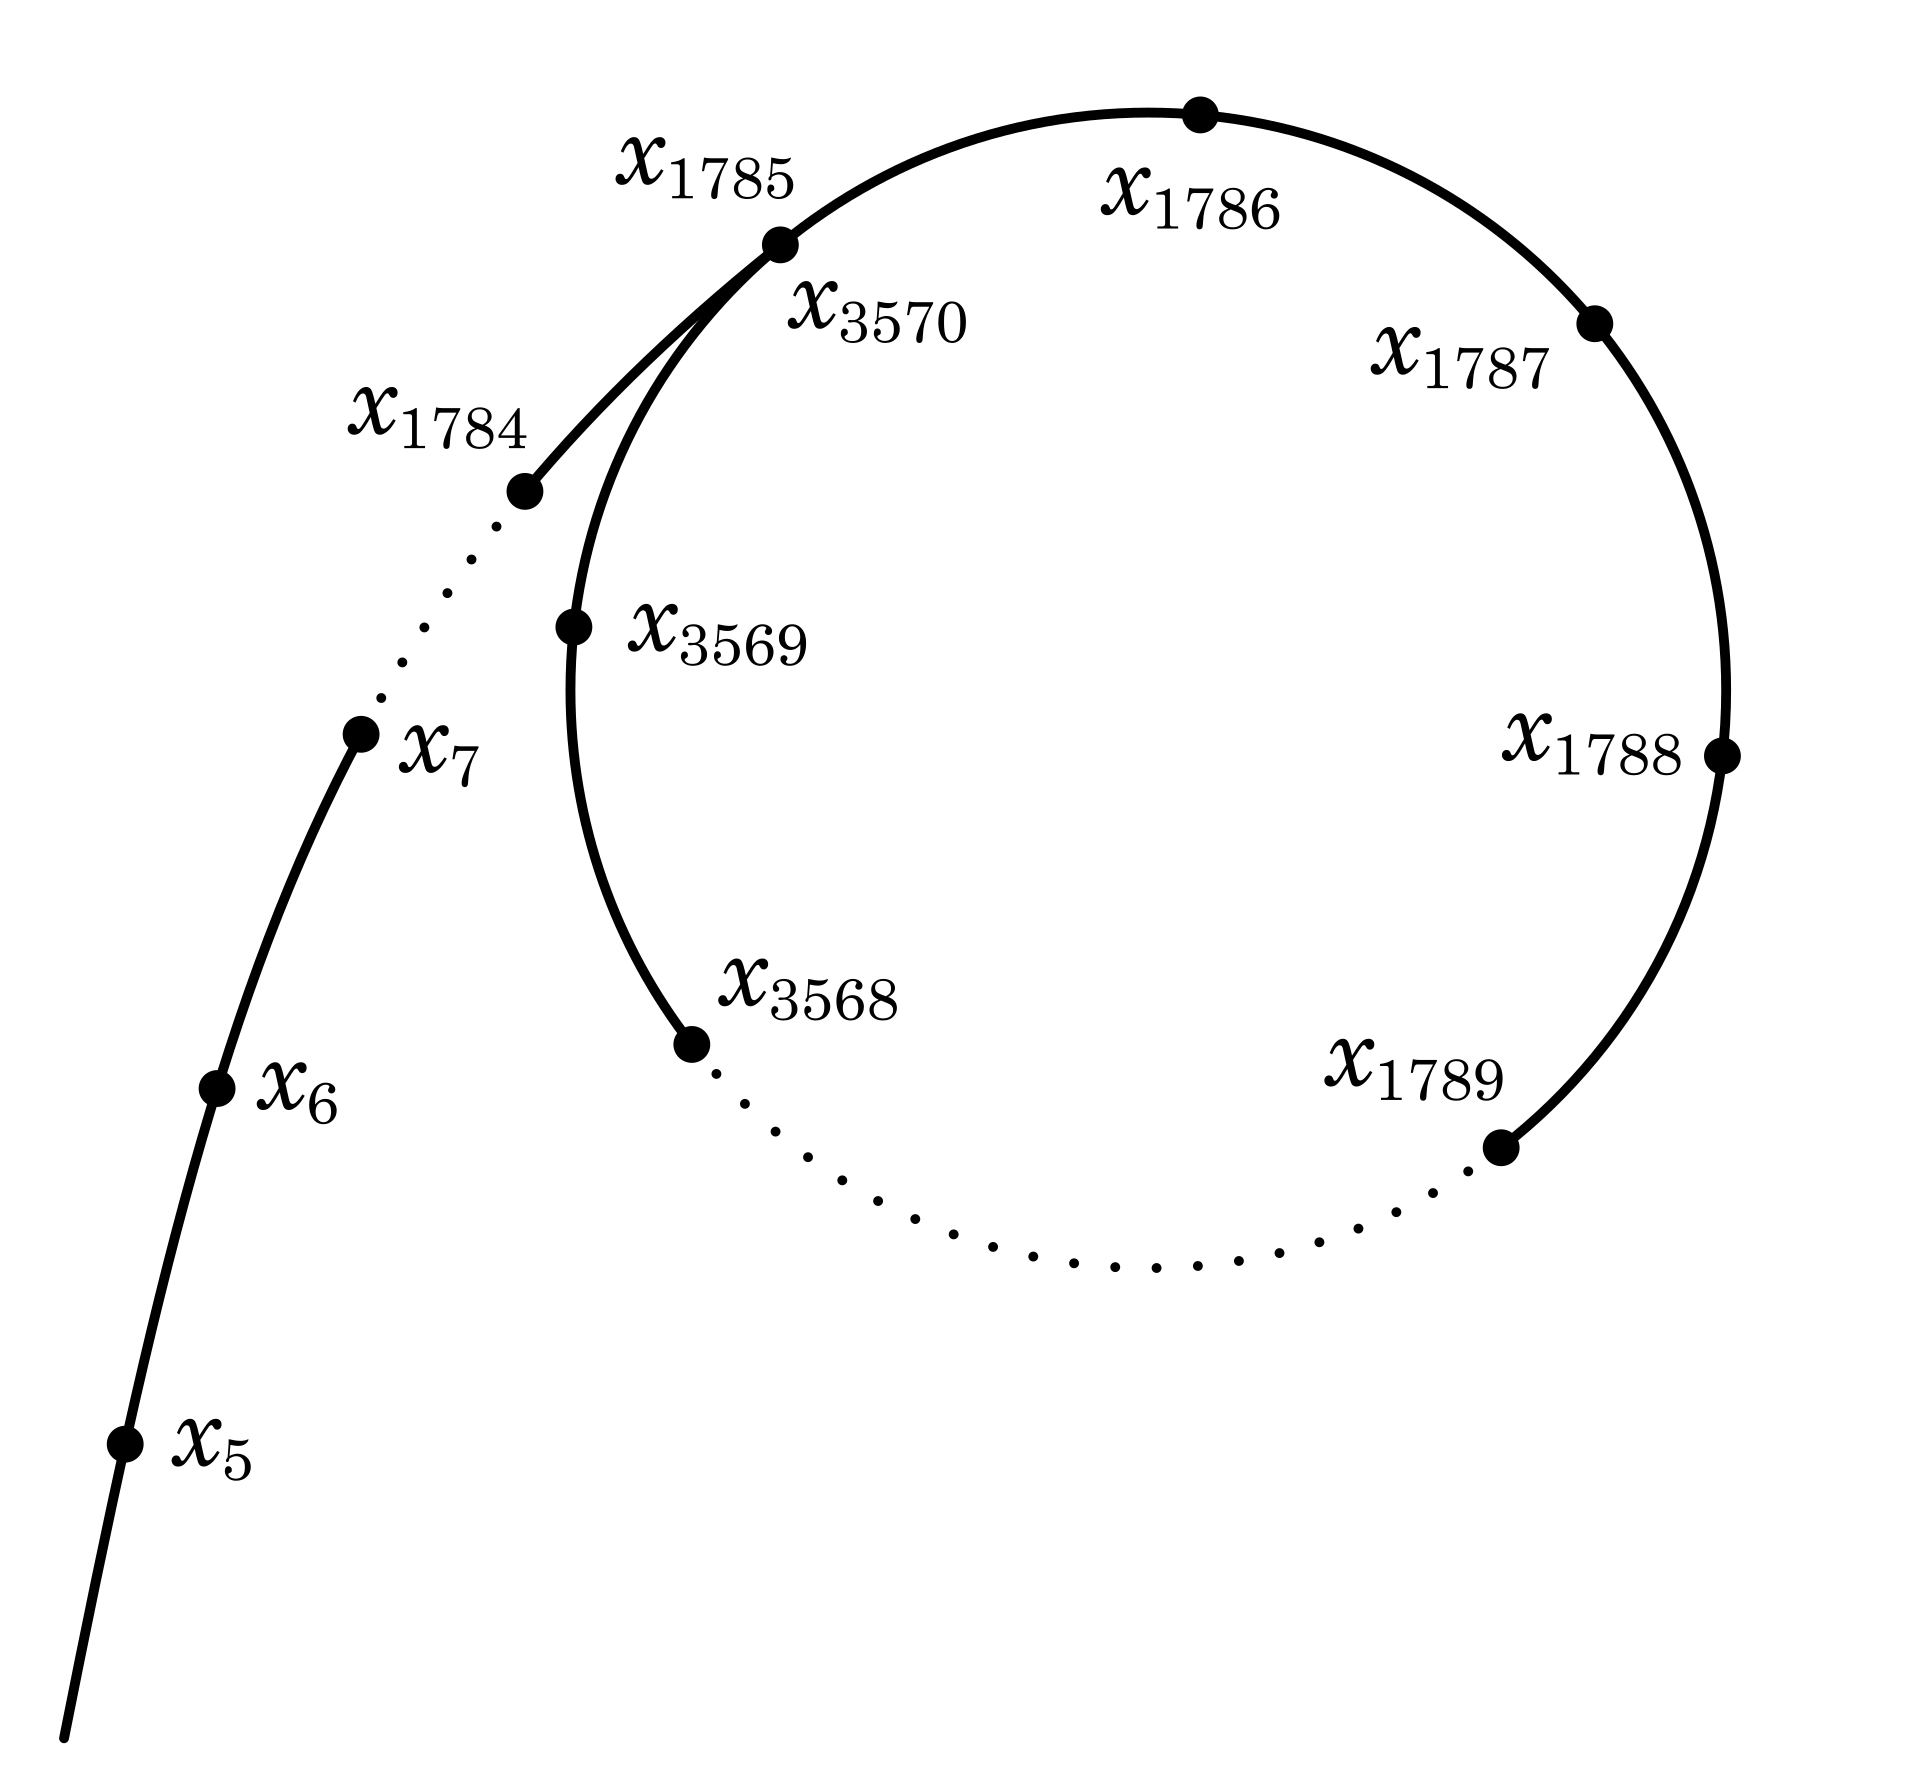 Cycle diagram resembling the Greek letter ρ